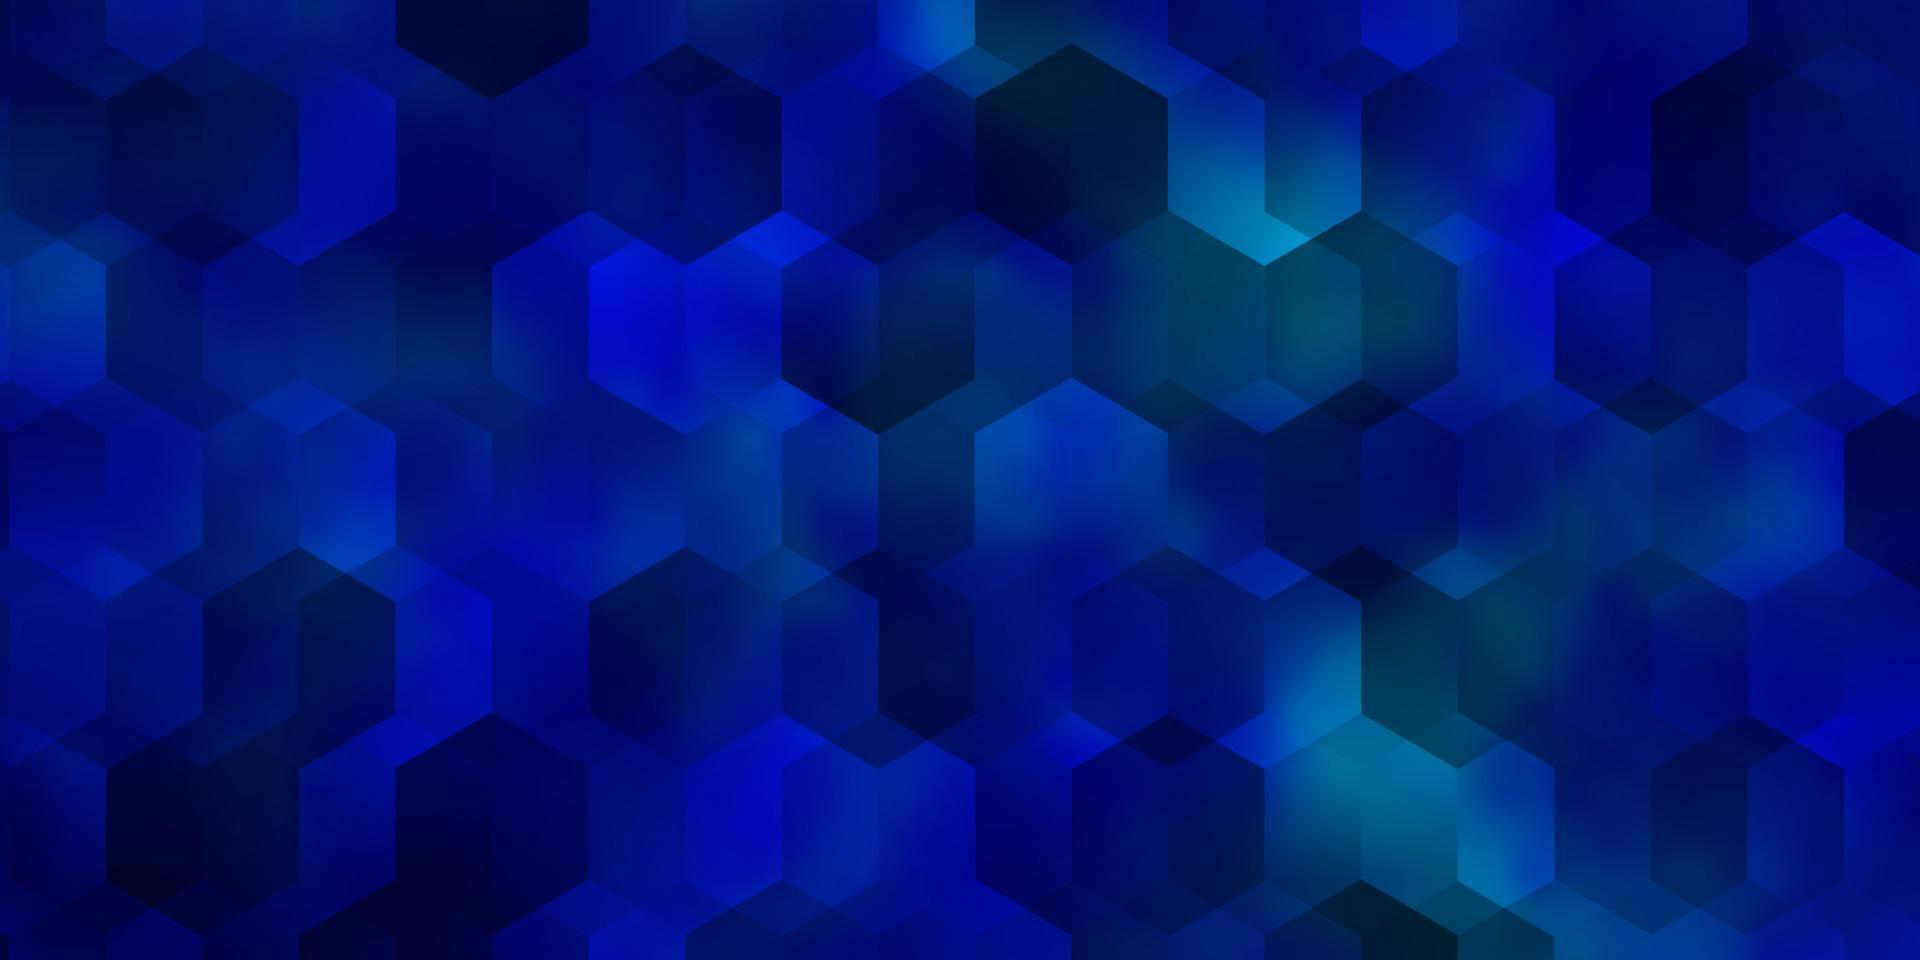 Light BLUE vector background with set of hexagons.